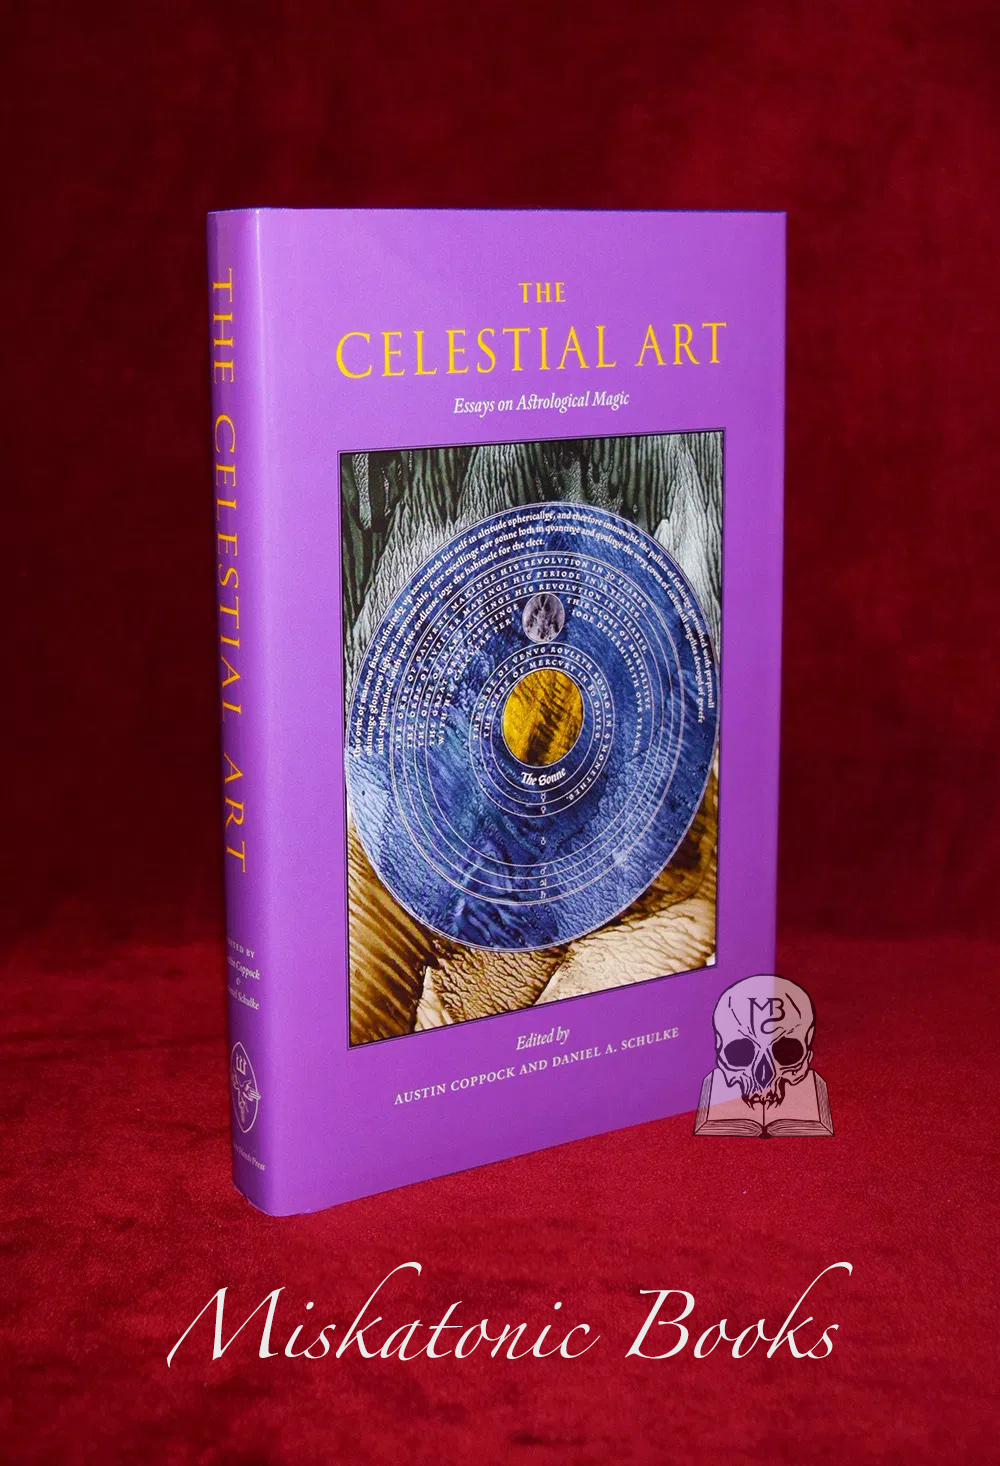 THE CELESTIAL ART: Essays on Astrological Magic Edited by Austin Coppock and Daniel A. Schulke (Limited Edition Hardcover)